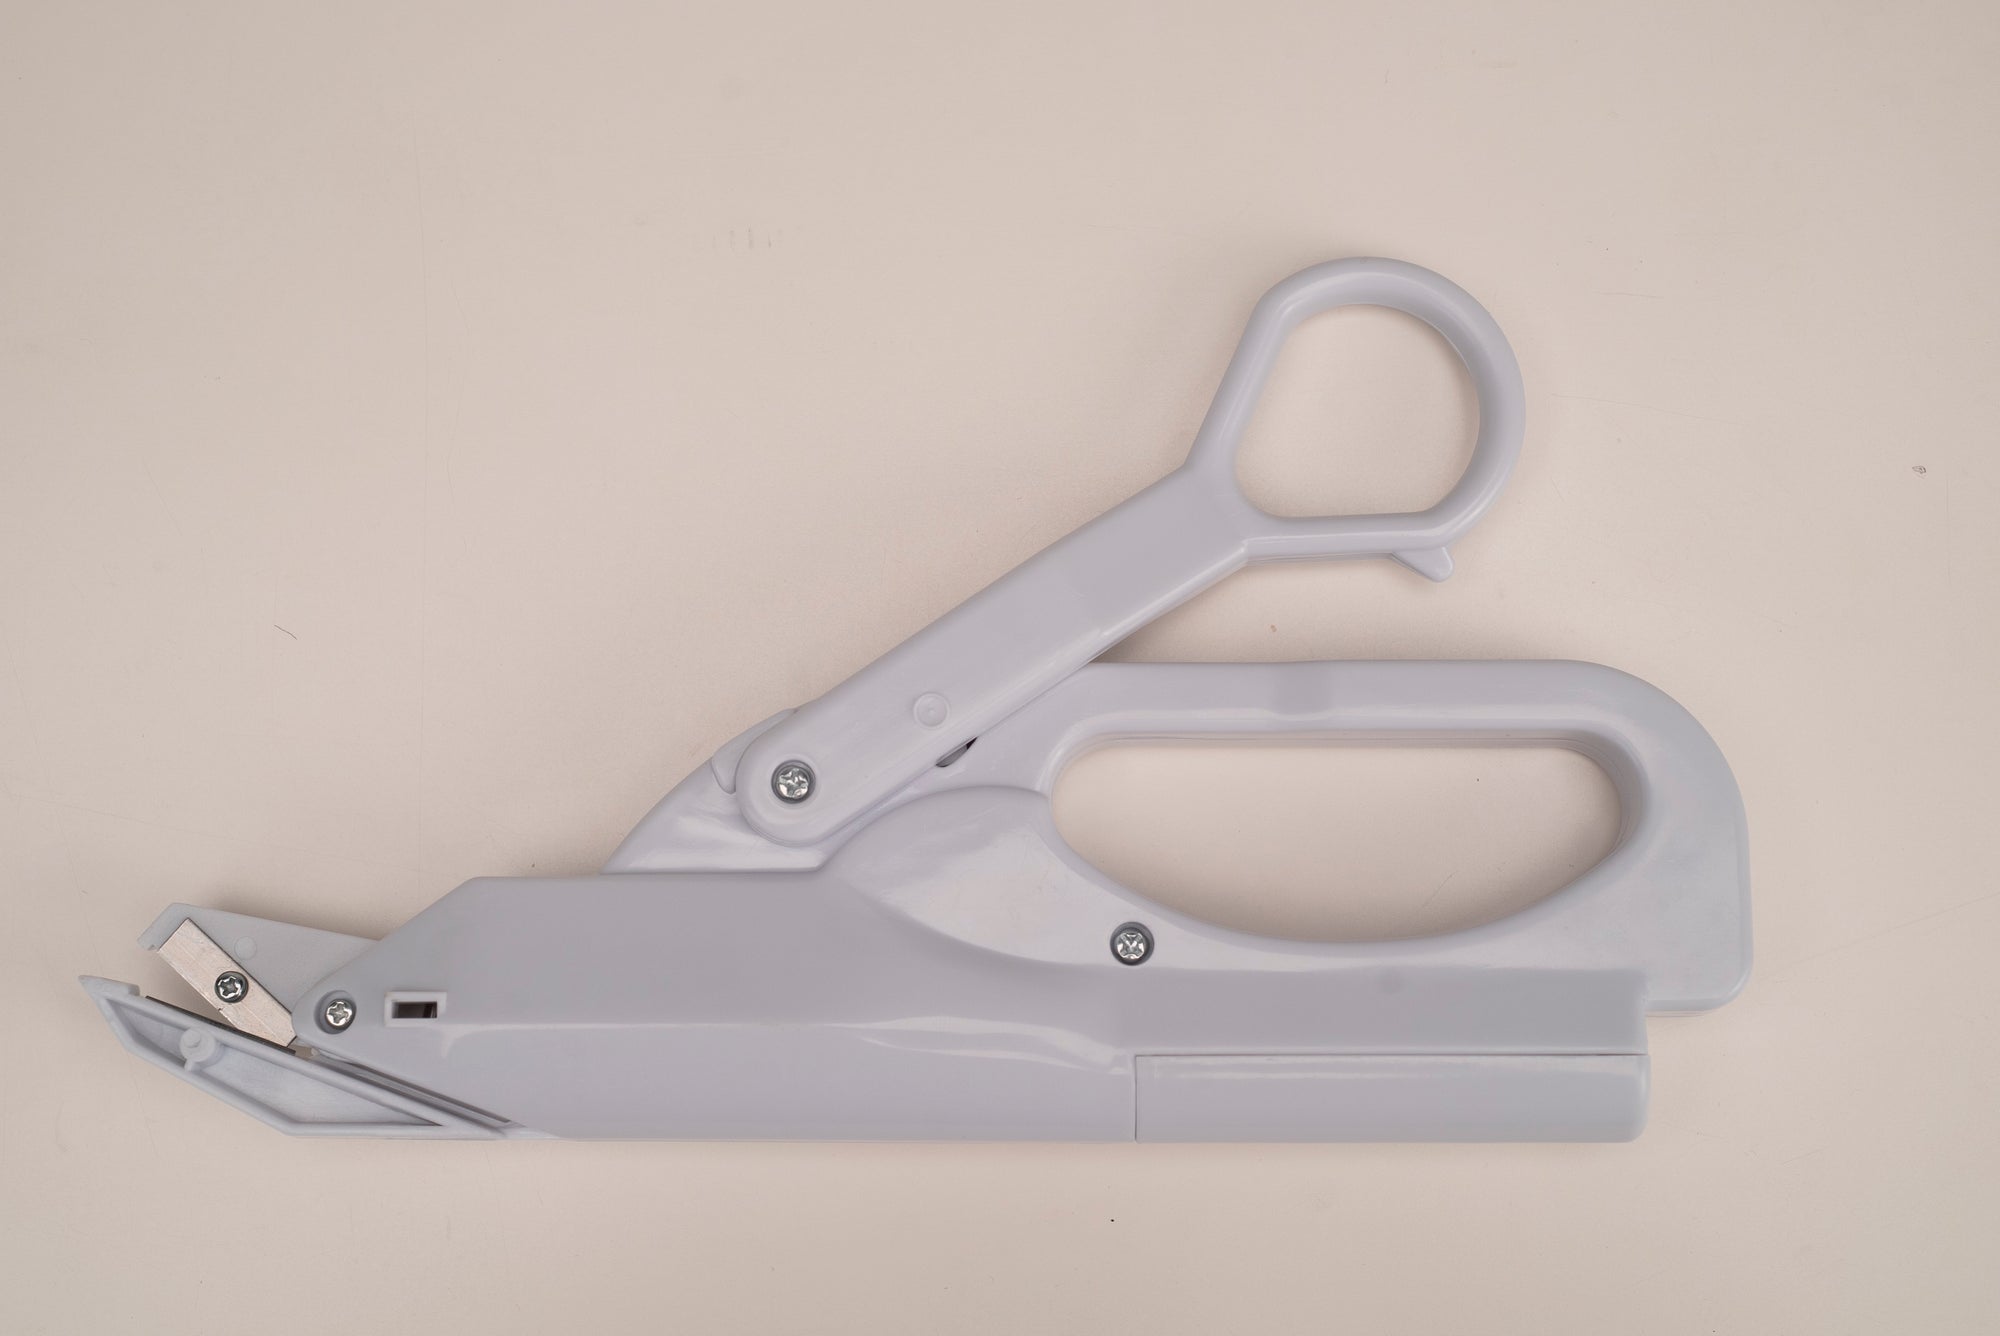 Battery Operated Switch Adapted Scissor